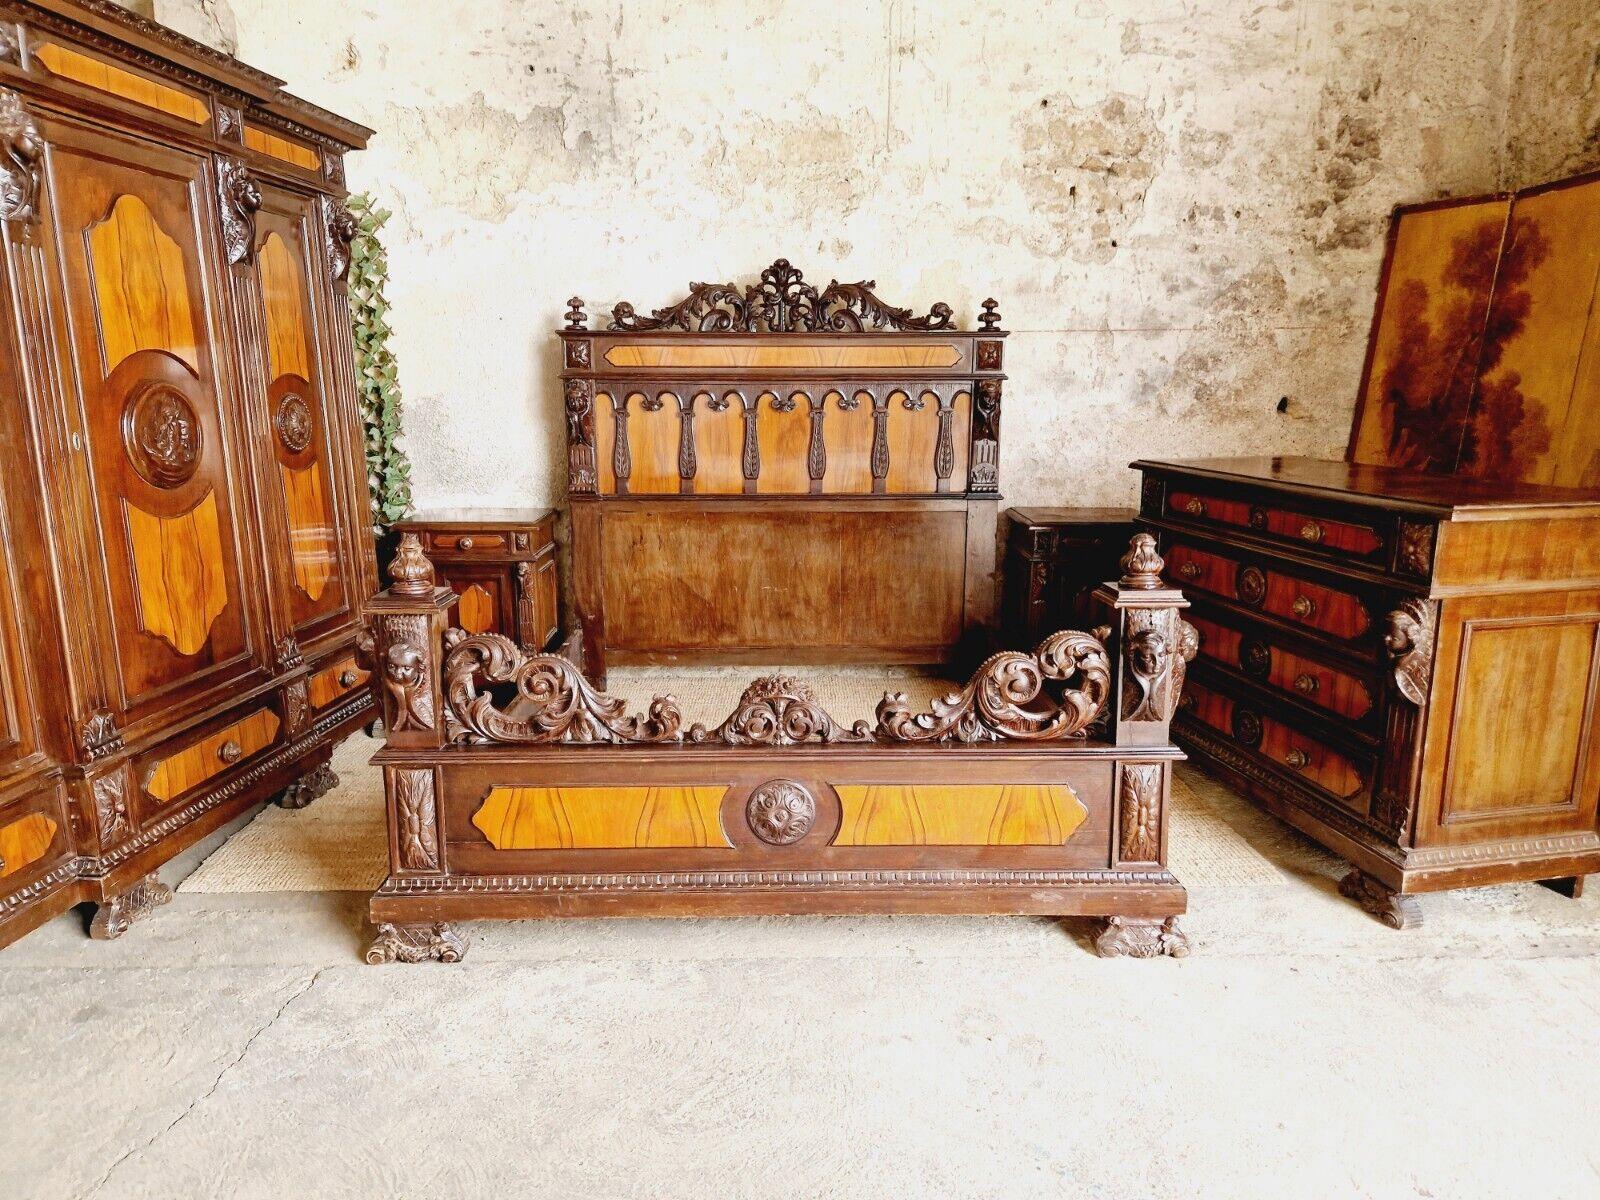 This exquisite 5-piece bedroom set features a magnificent king-size bed with an impressive Baroque-style headboard and footboard, crafted from Beautiful Mahogany wood. The bed has a fabulous carved putti cherubs to the Headboard and Footboard. The